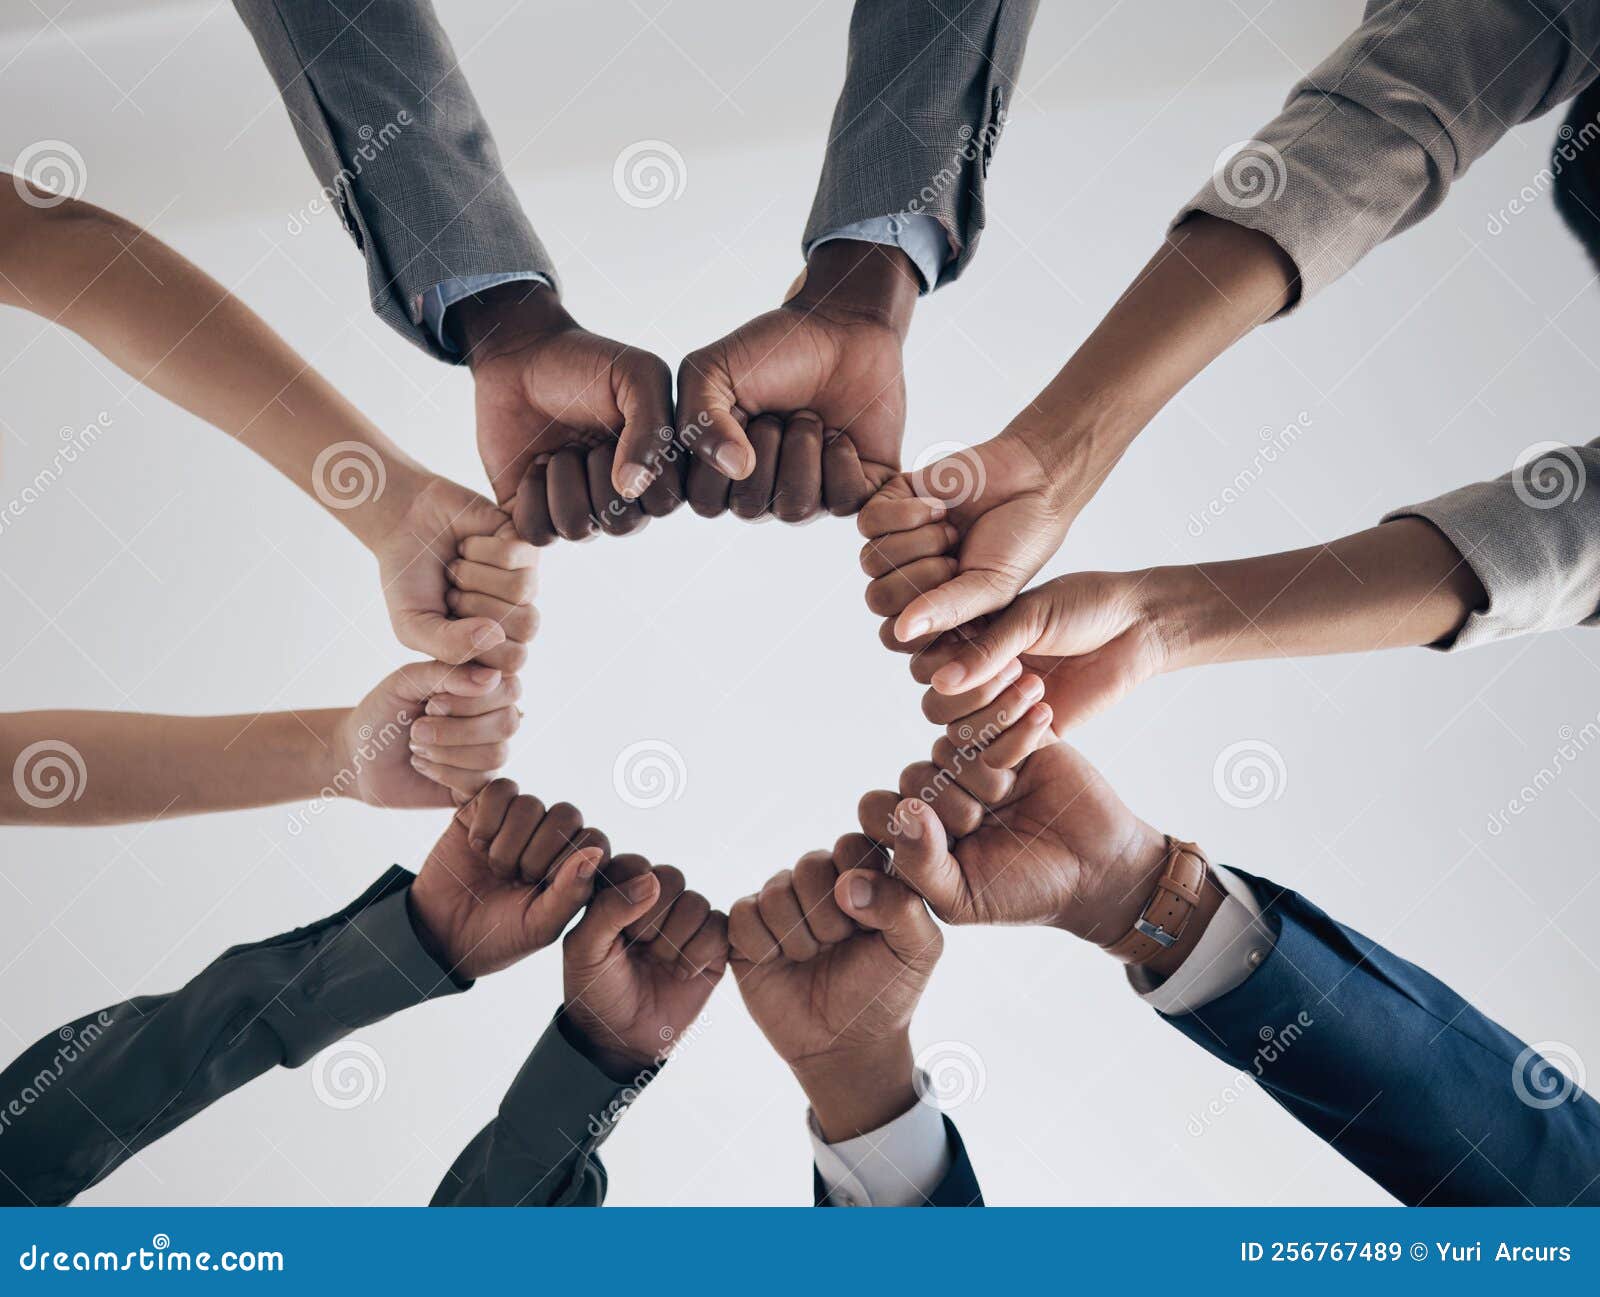 Fist Bump Hands Team Building Mission Collaboration Business Partnership  Goals Stock Photo by ©PeopleImages.com 619892698